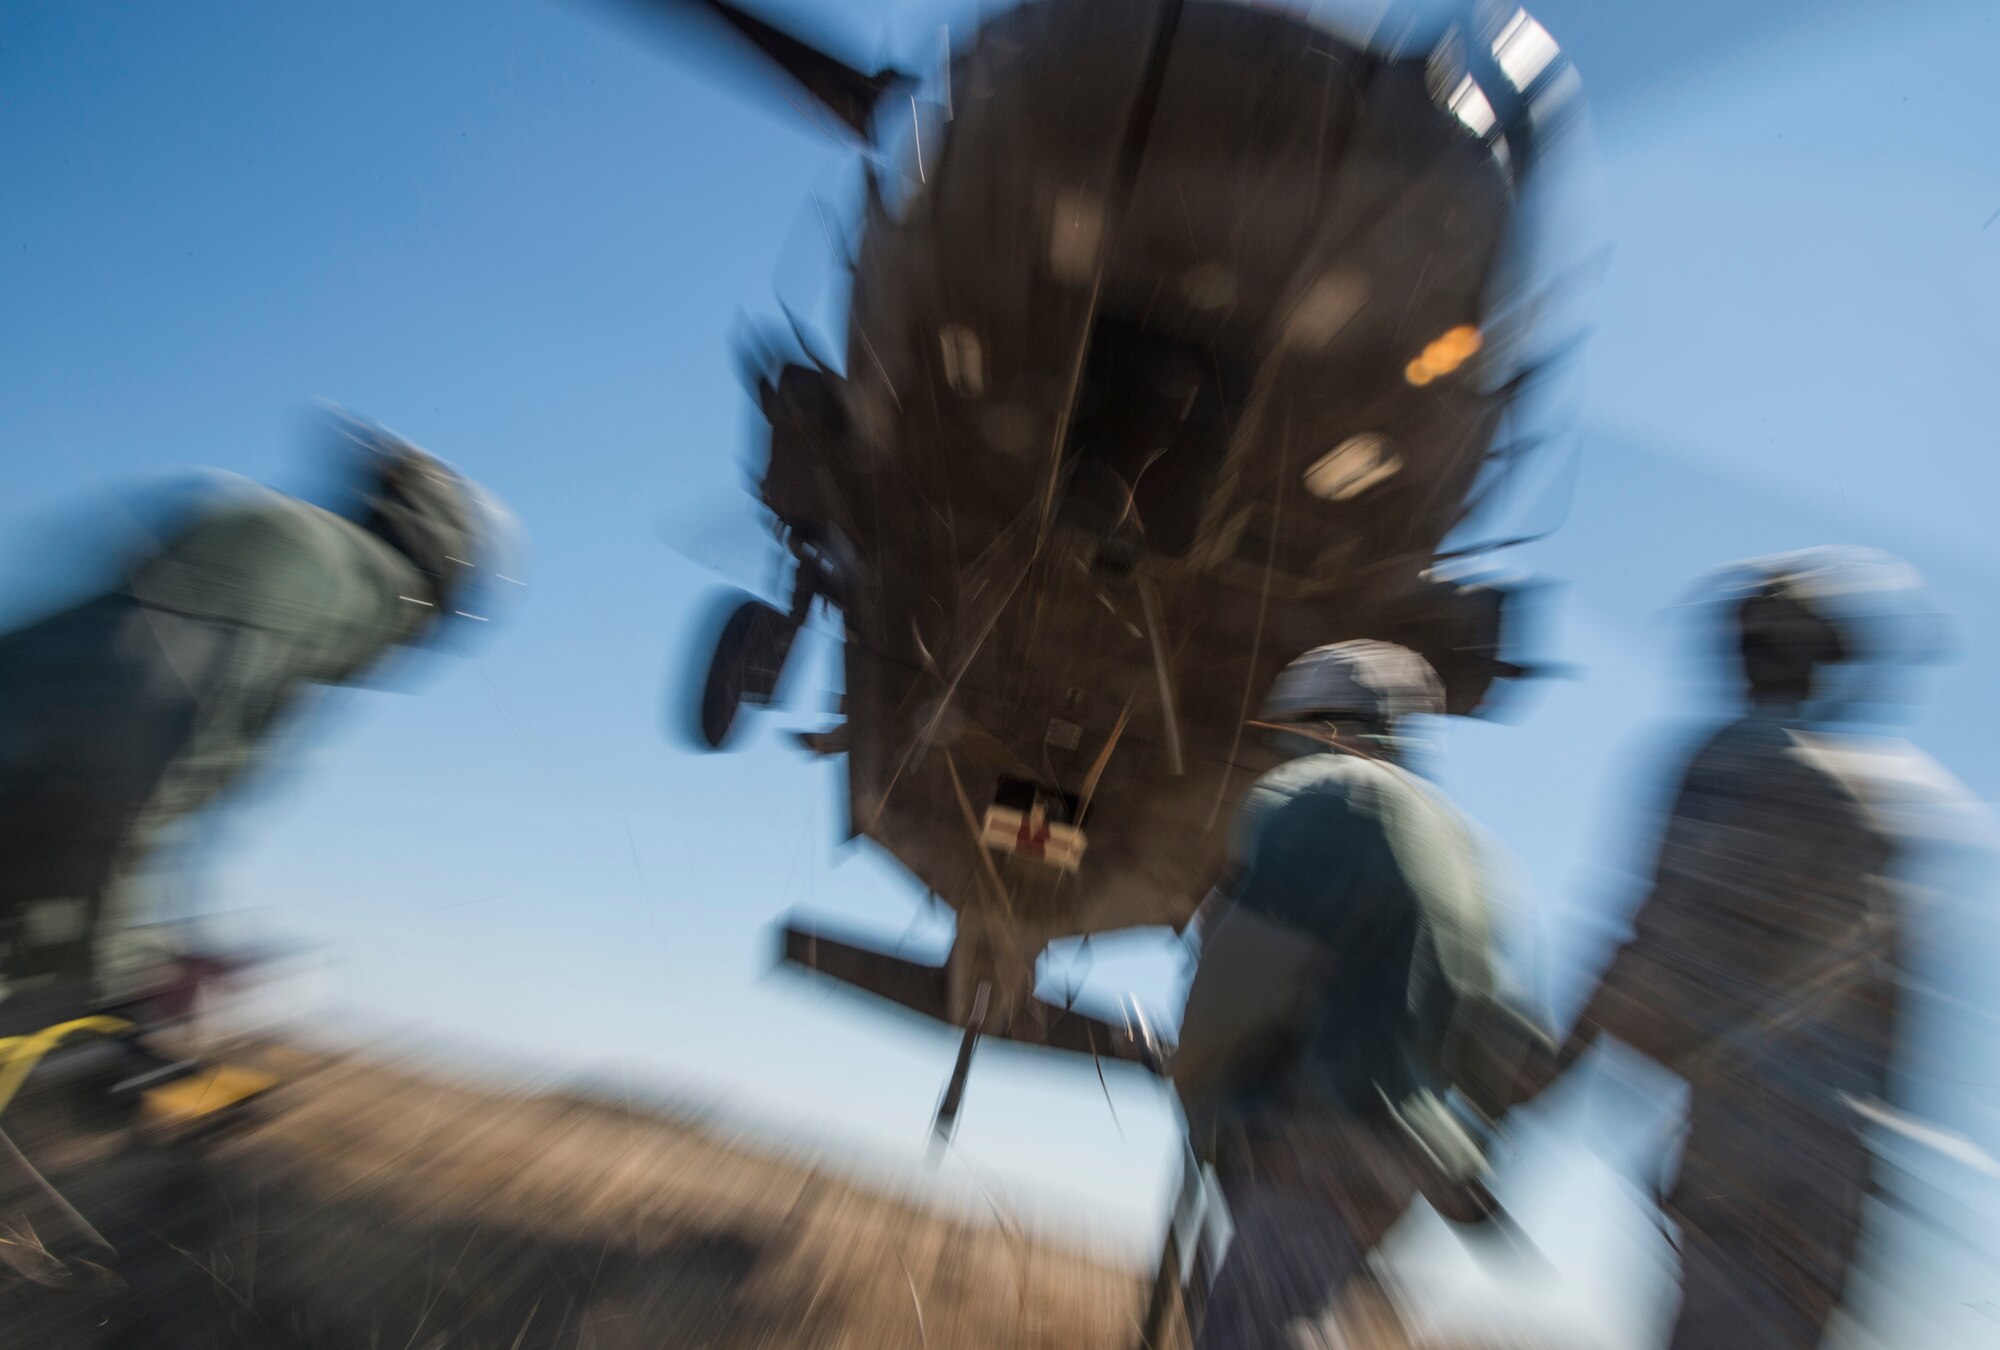 Airmen from the 621st Contingency Response Wing attempt to hook up cargo to a U.S. Army UH-60 Black Hawk helicopter from the 1-150th Assault Helicopter Battalion during sling-load training at Joint Base McGuire-Dix-Lakehurst, N.J., April 1, 2015. The training allows the Army pilots and crew members and Air Force Airmen to stay proficient with sling-load operations. (U.S. Air Force photo/Staff Sgt. Gustavo Gonzalez/RELEASED)